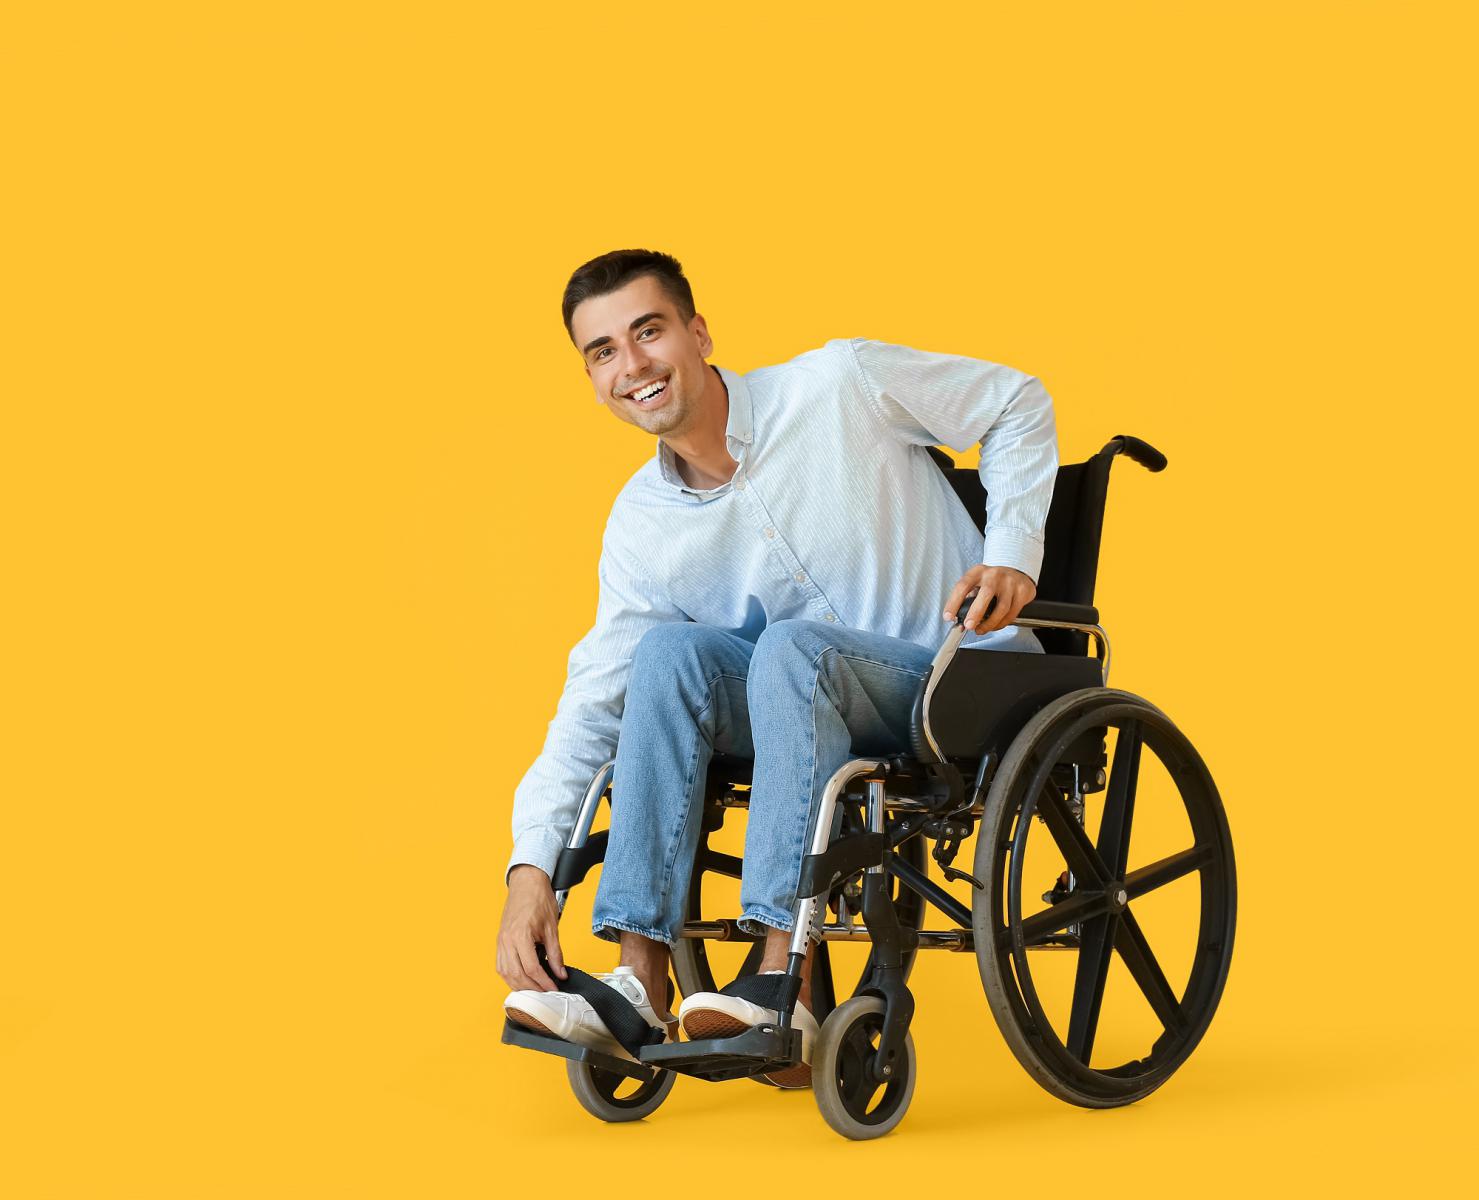 Image of a man smiling and sitting in a manual wheelchair.